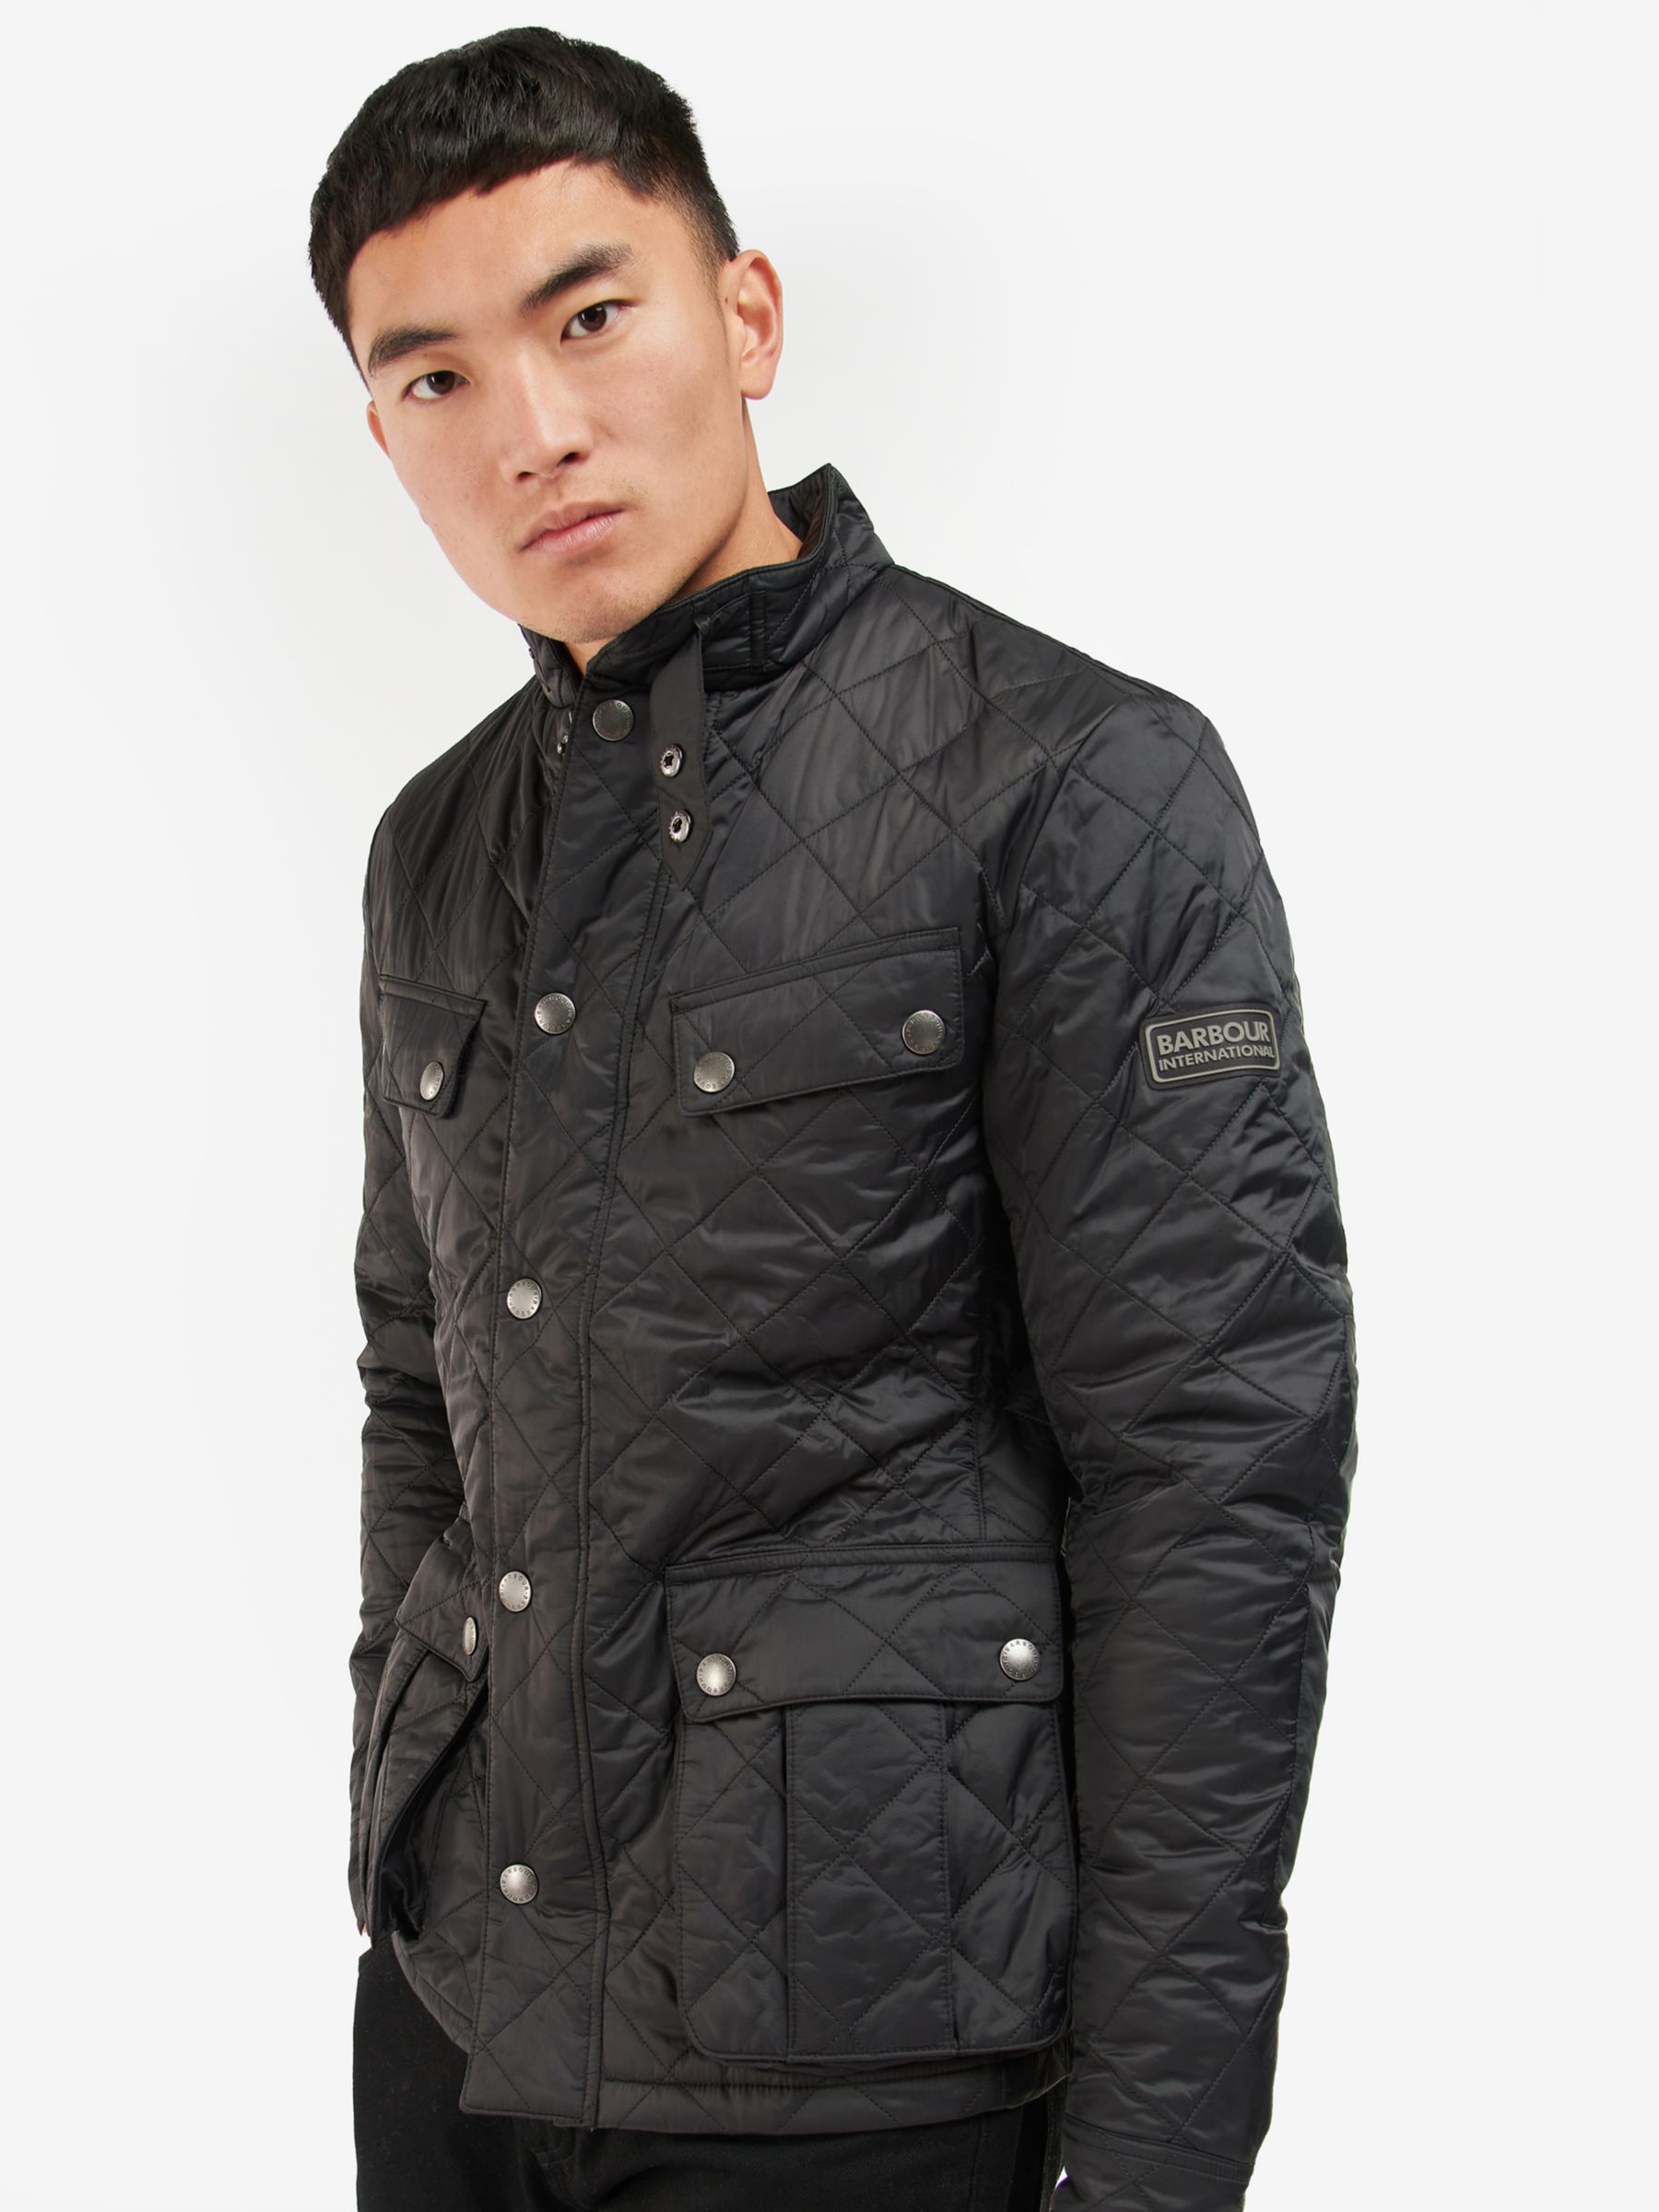 Barbour International Ariel Soft Touch Quilted Jacket, Black at John ...